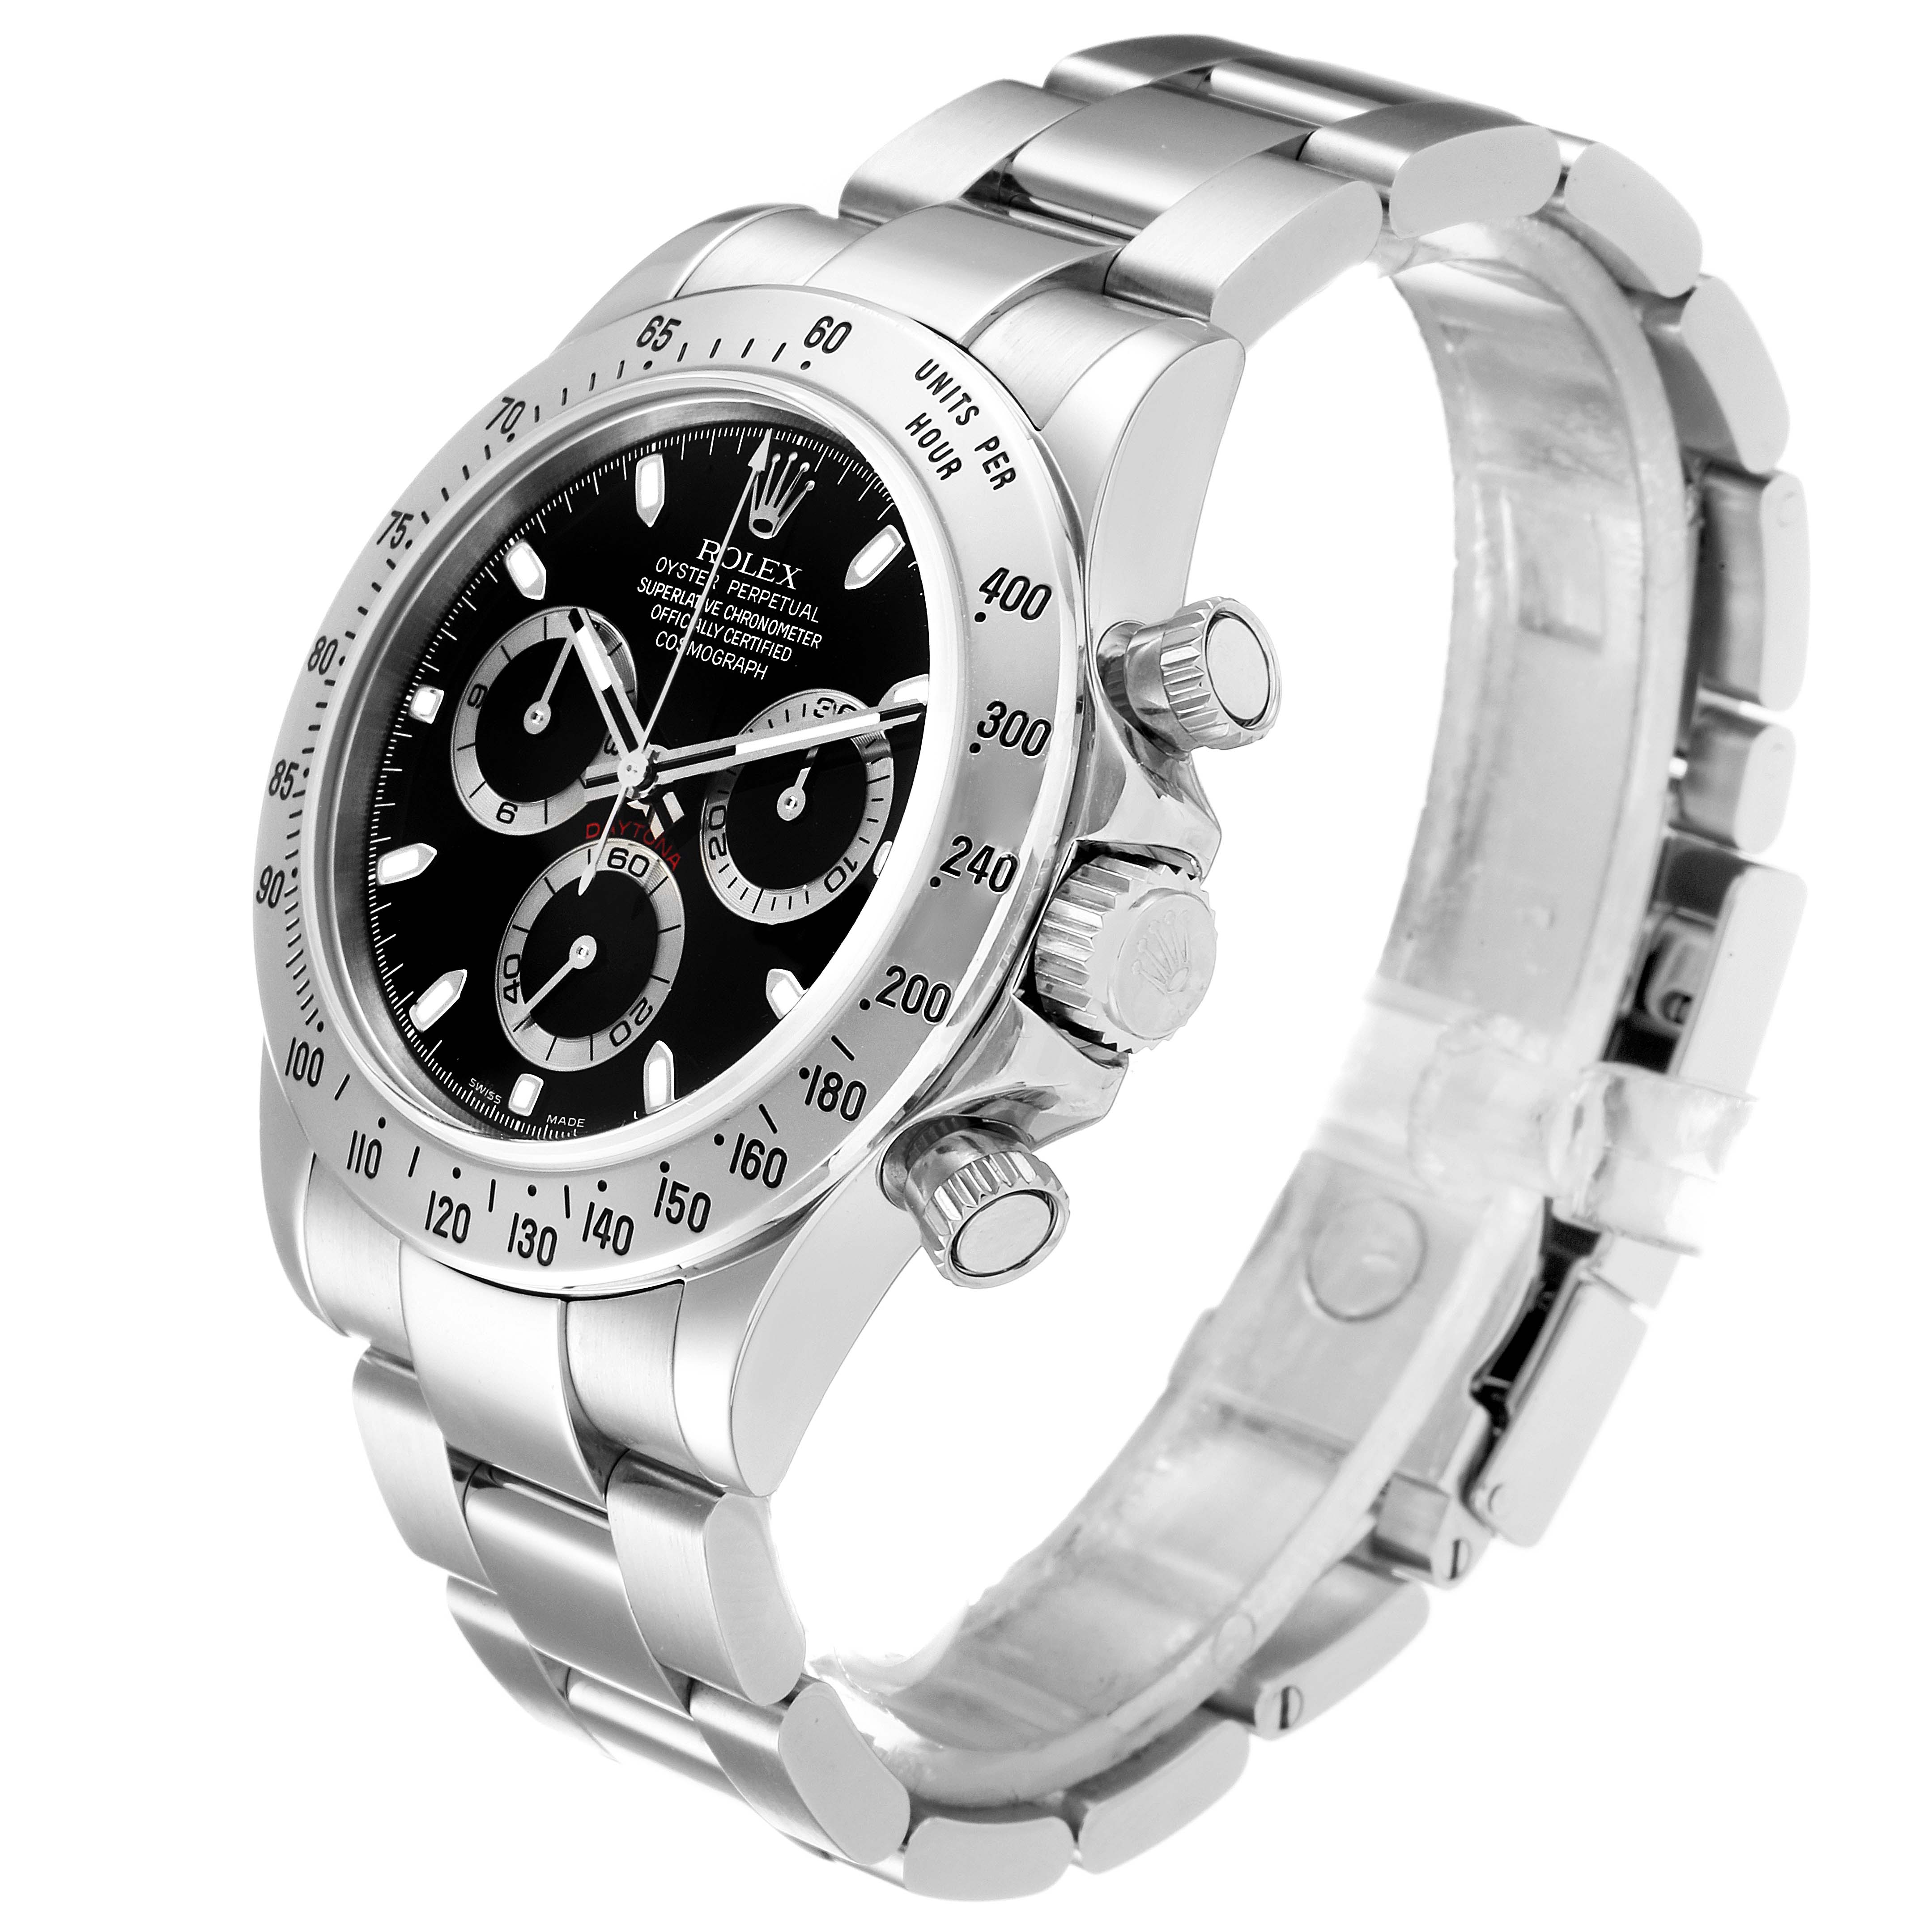 Rolex Cosmograph Daytona Stainless Steel Black Dial Mens Watch 116520 ...